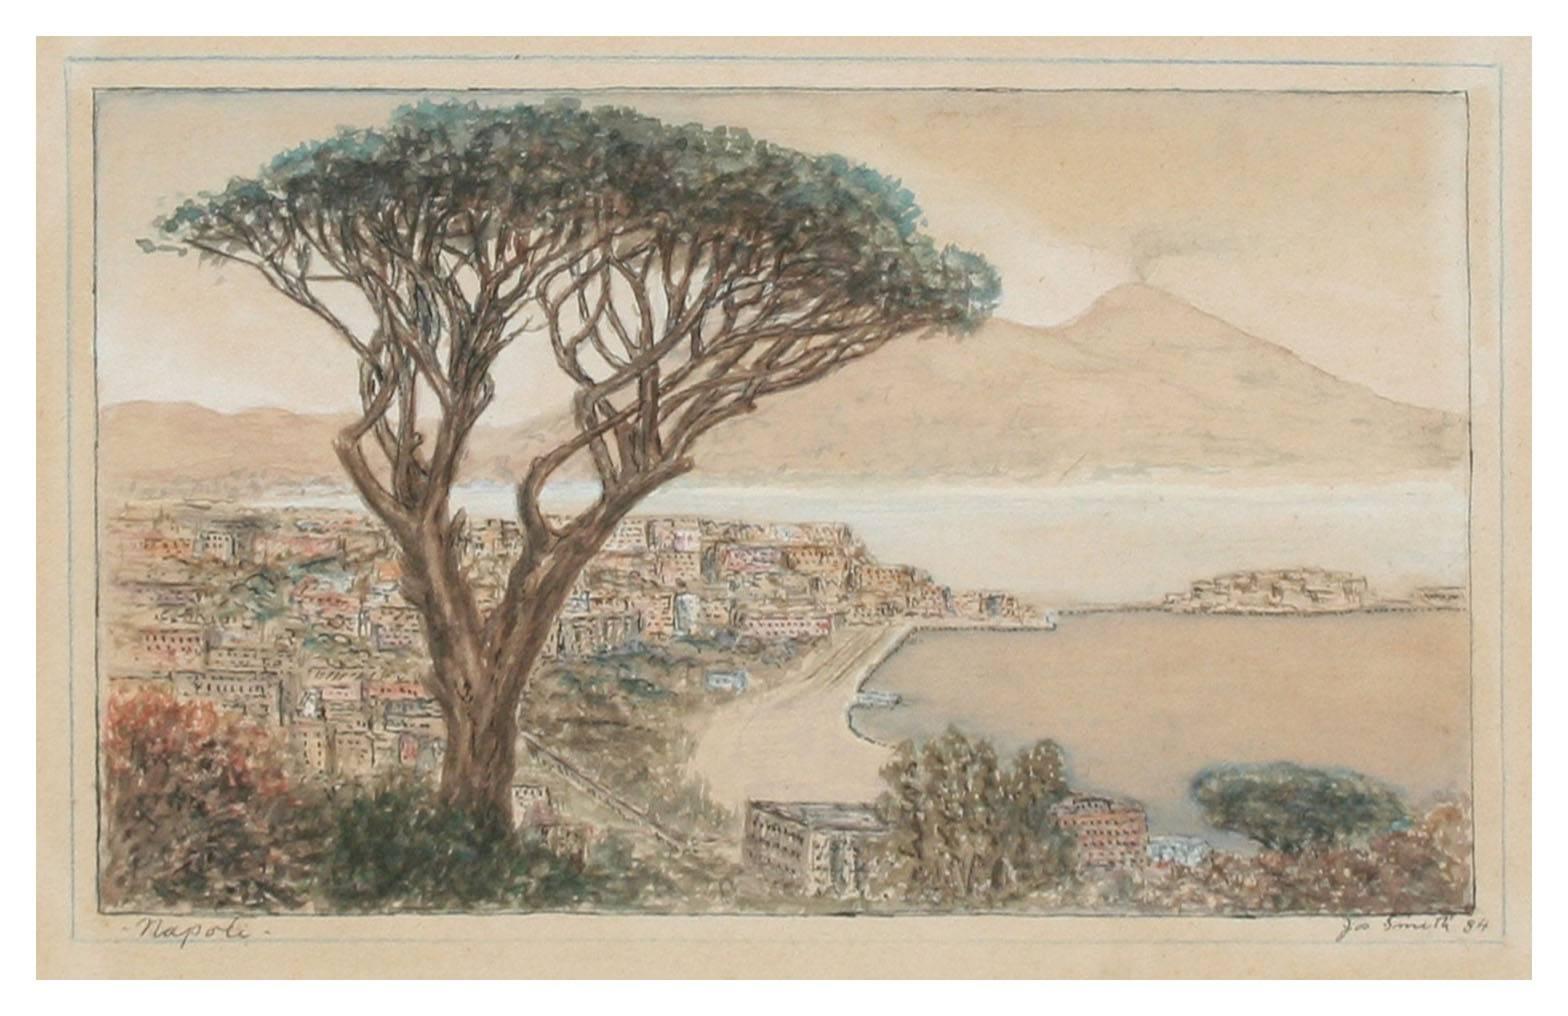 Naples, 1934 - Painting by Joseph Lindon Smith